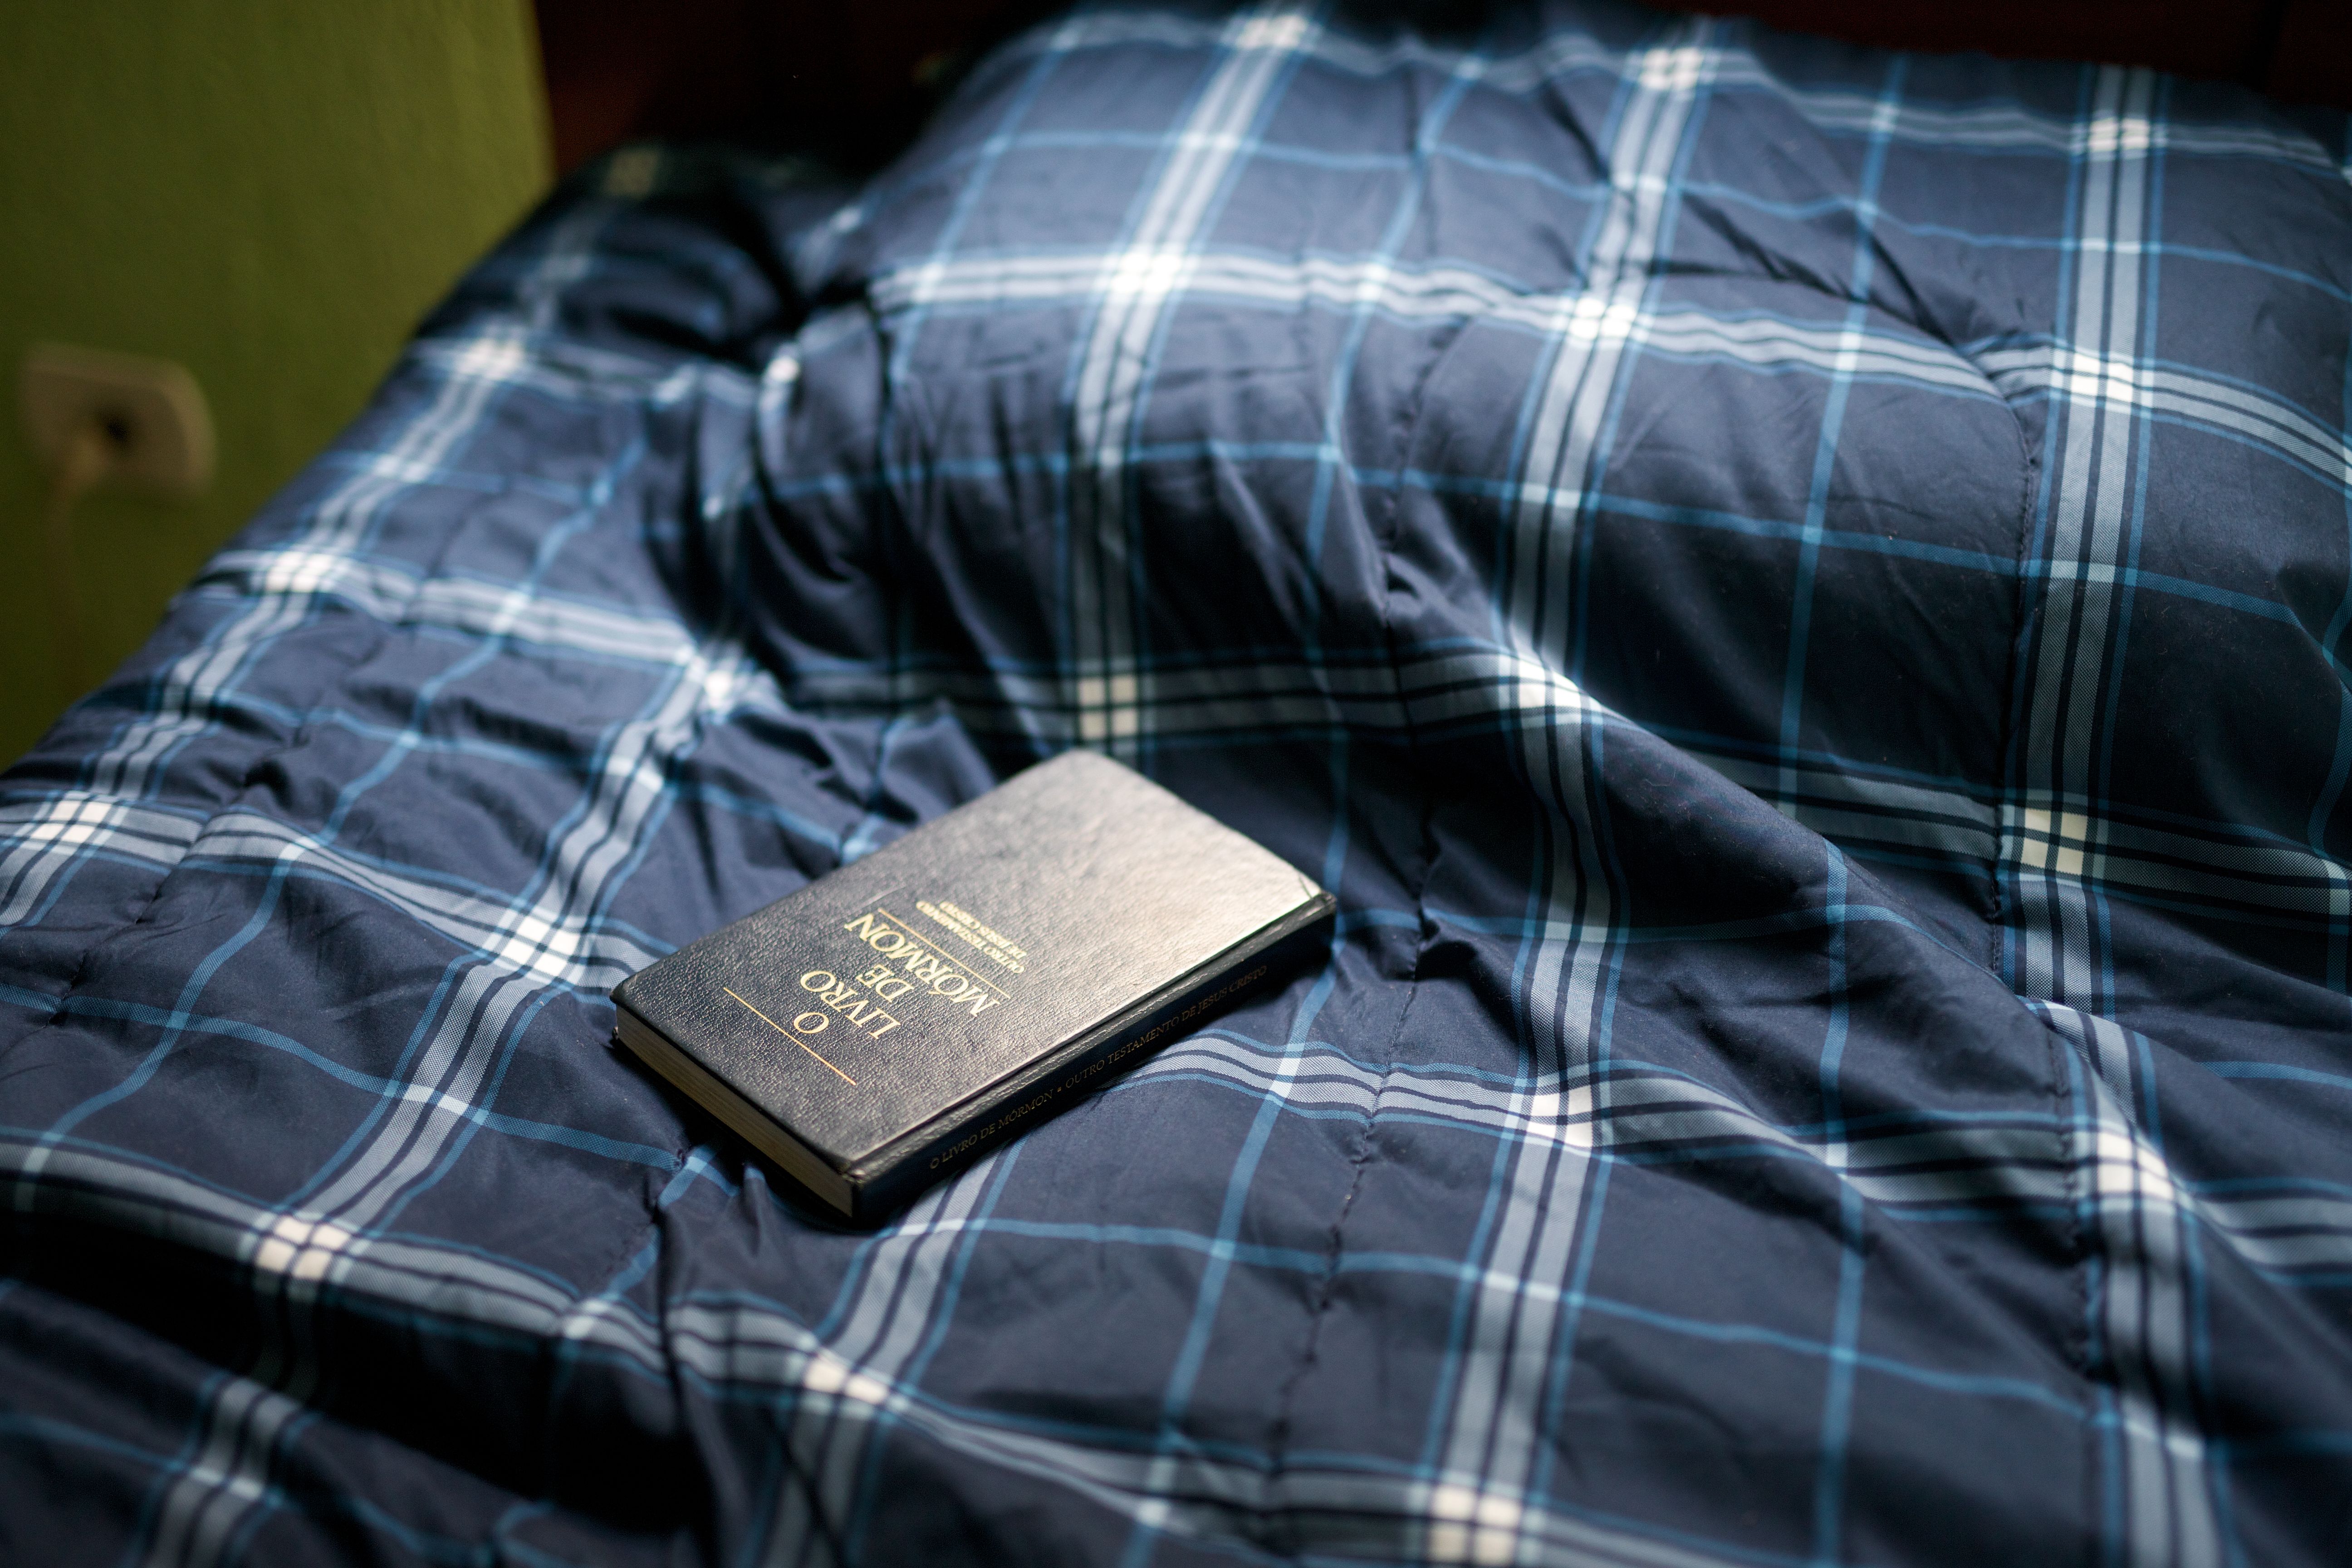 A Portuguese copy of the Book of Mormon lying closed on a bed.